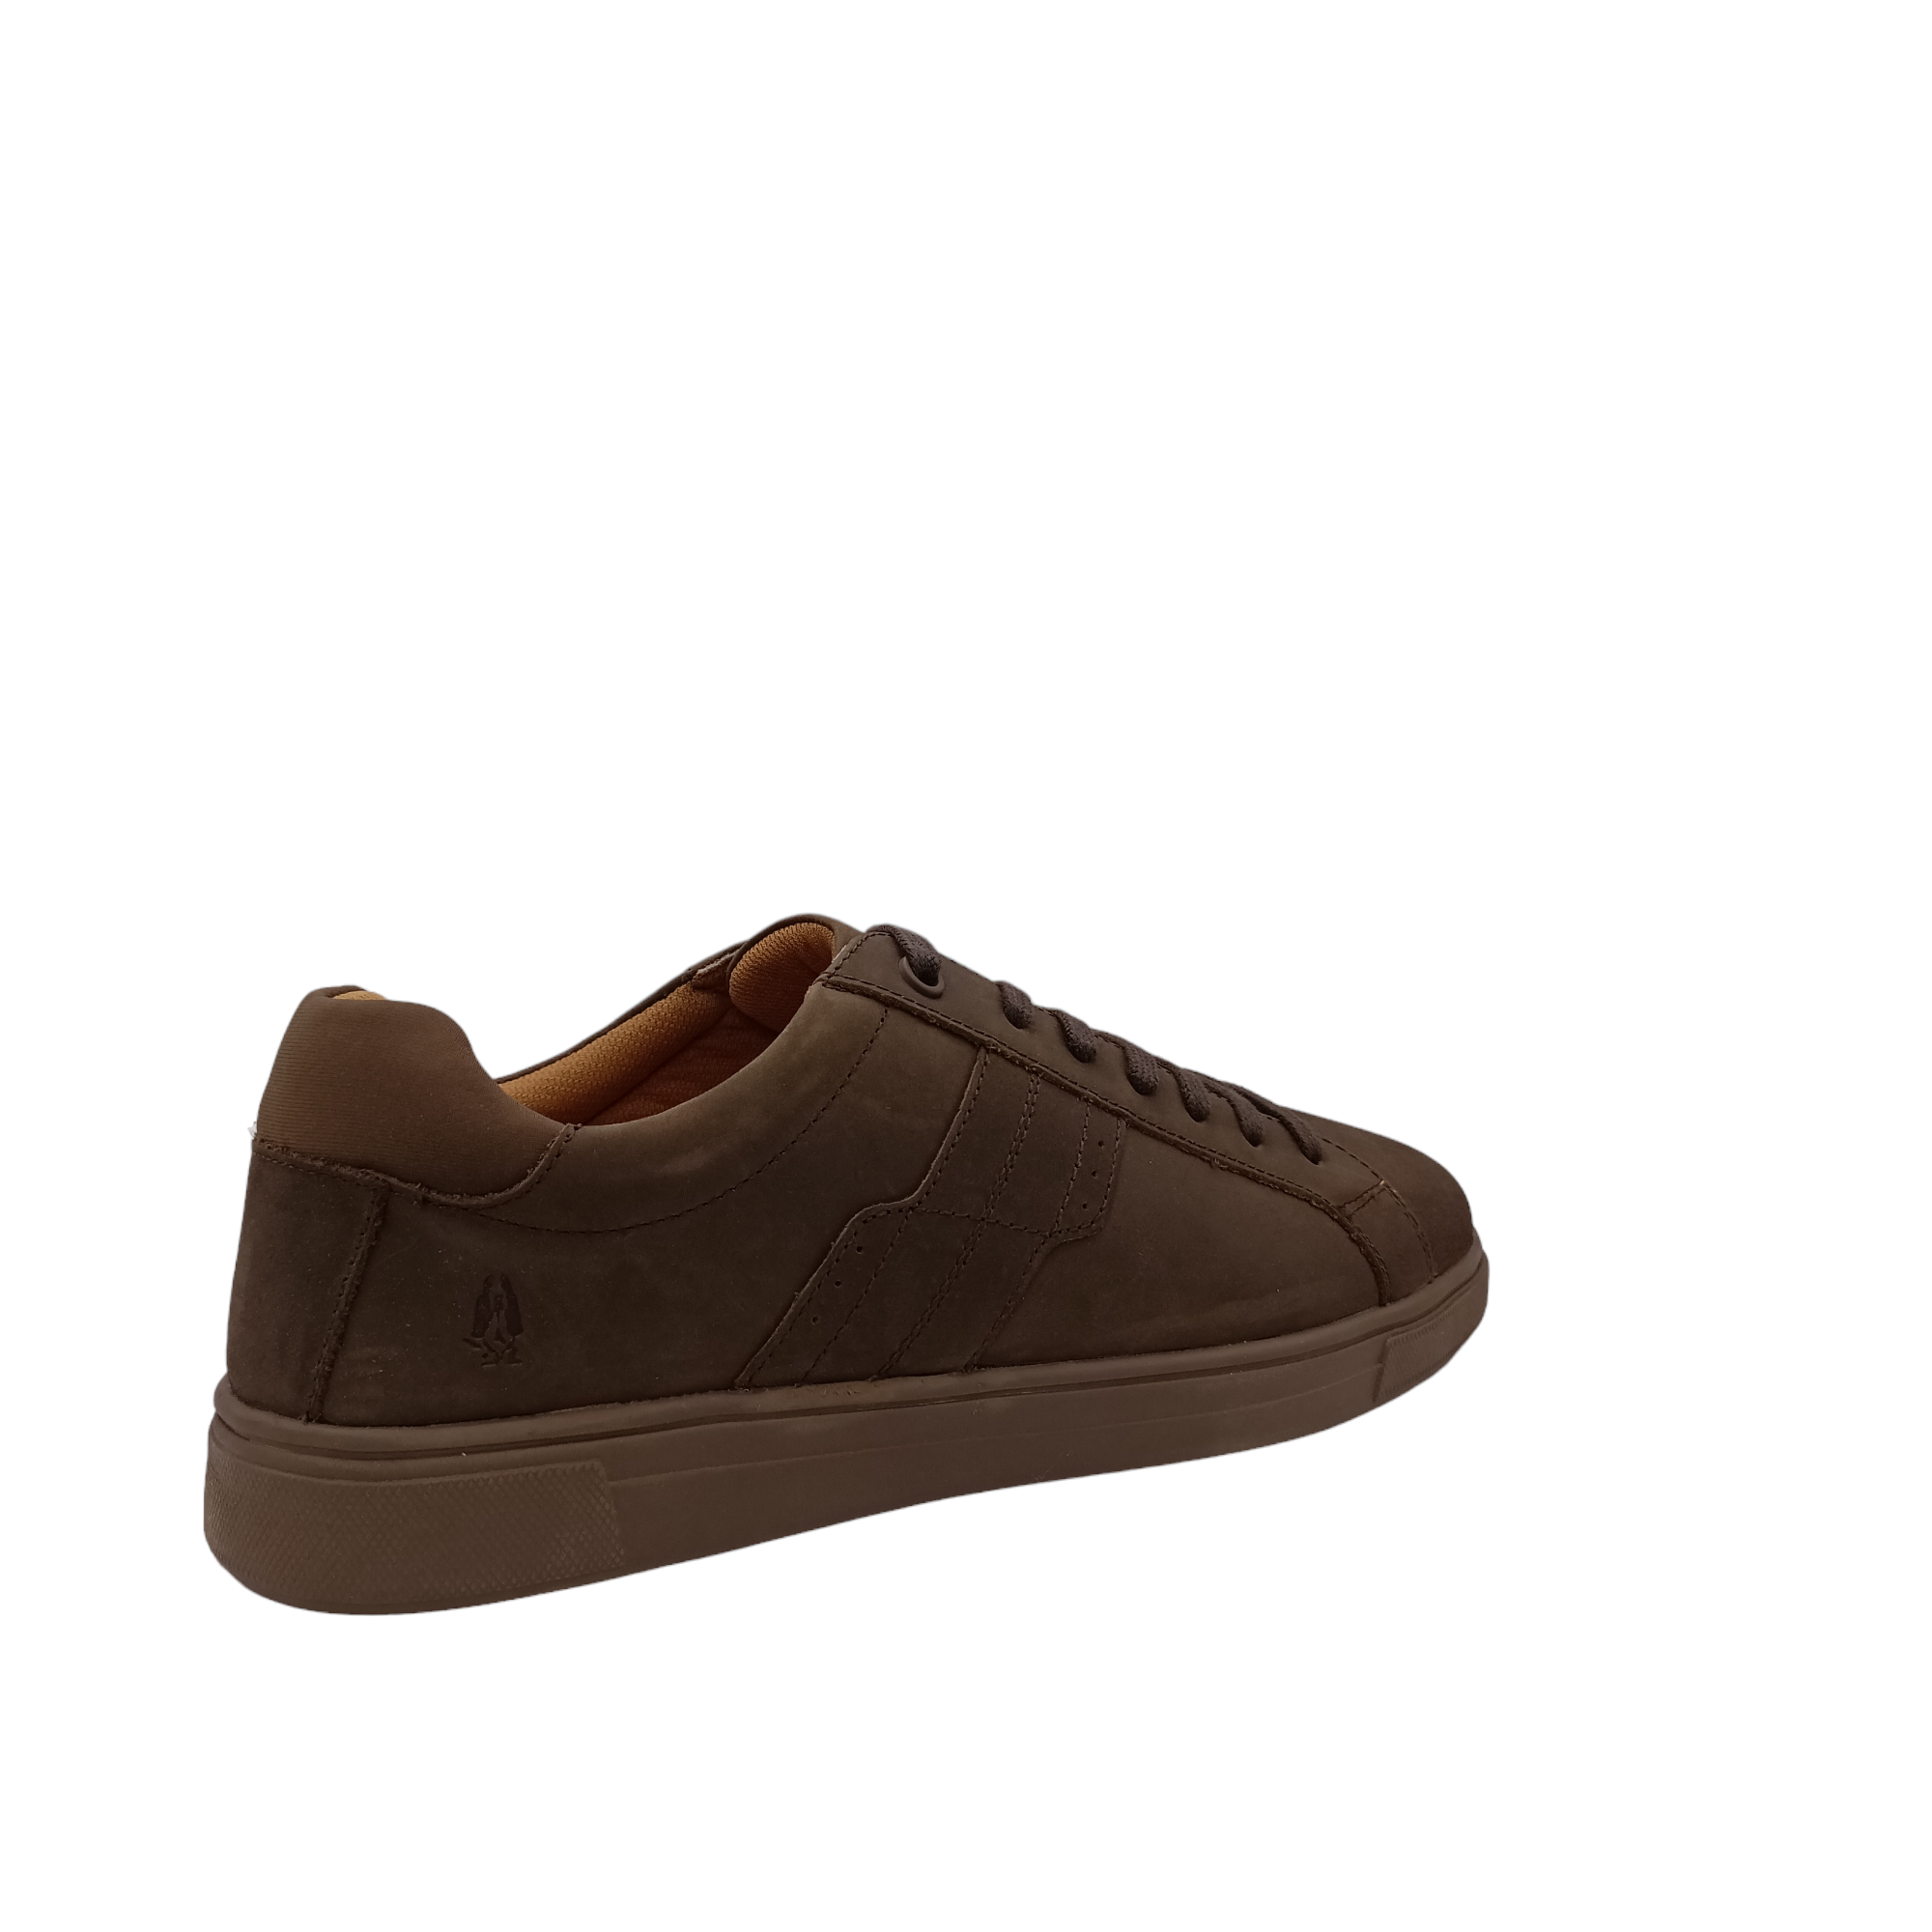 Gravity Leather from Hush Puppies.  back angled view of brown oiled leather lace up shoe with dark brown flat laces. Lightening pattern from laces down to dark brown sole. Shop Online and In-store with shoe&amp;me Mount Maunganui